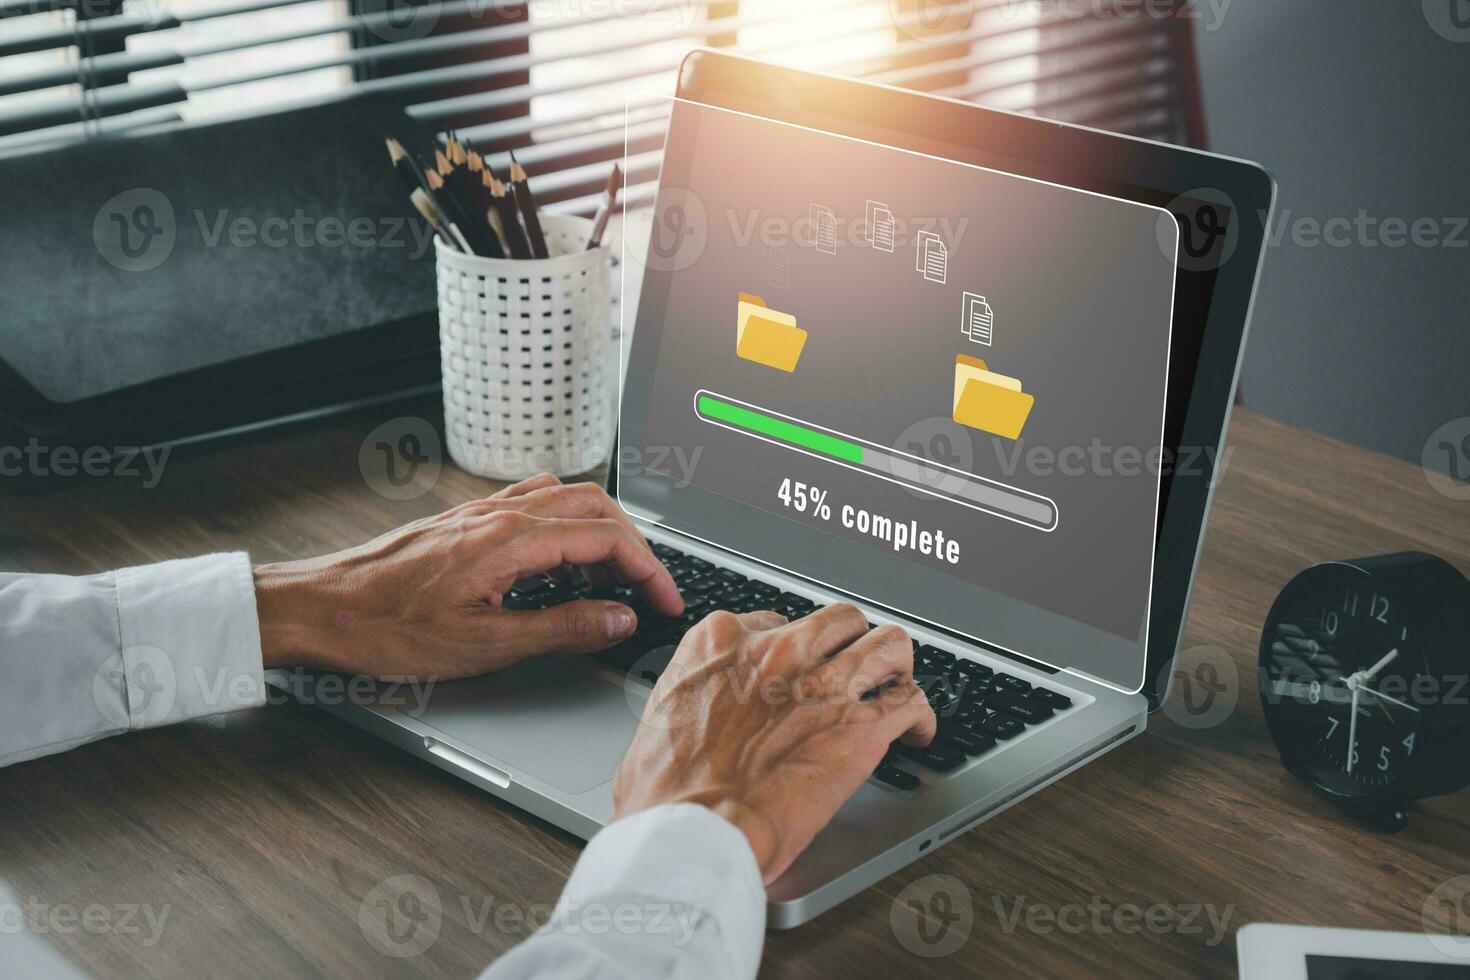 ransfer files data system relocation concept, Person hand using laptop computer waiting for transfer file process with loading bar icon on virtual screen. photo